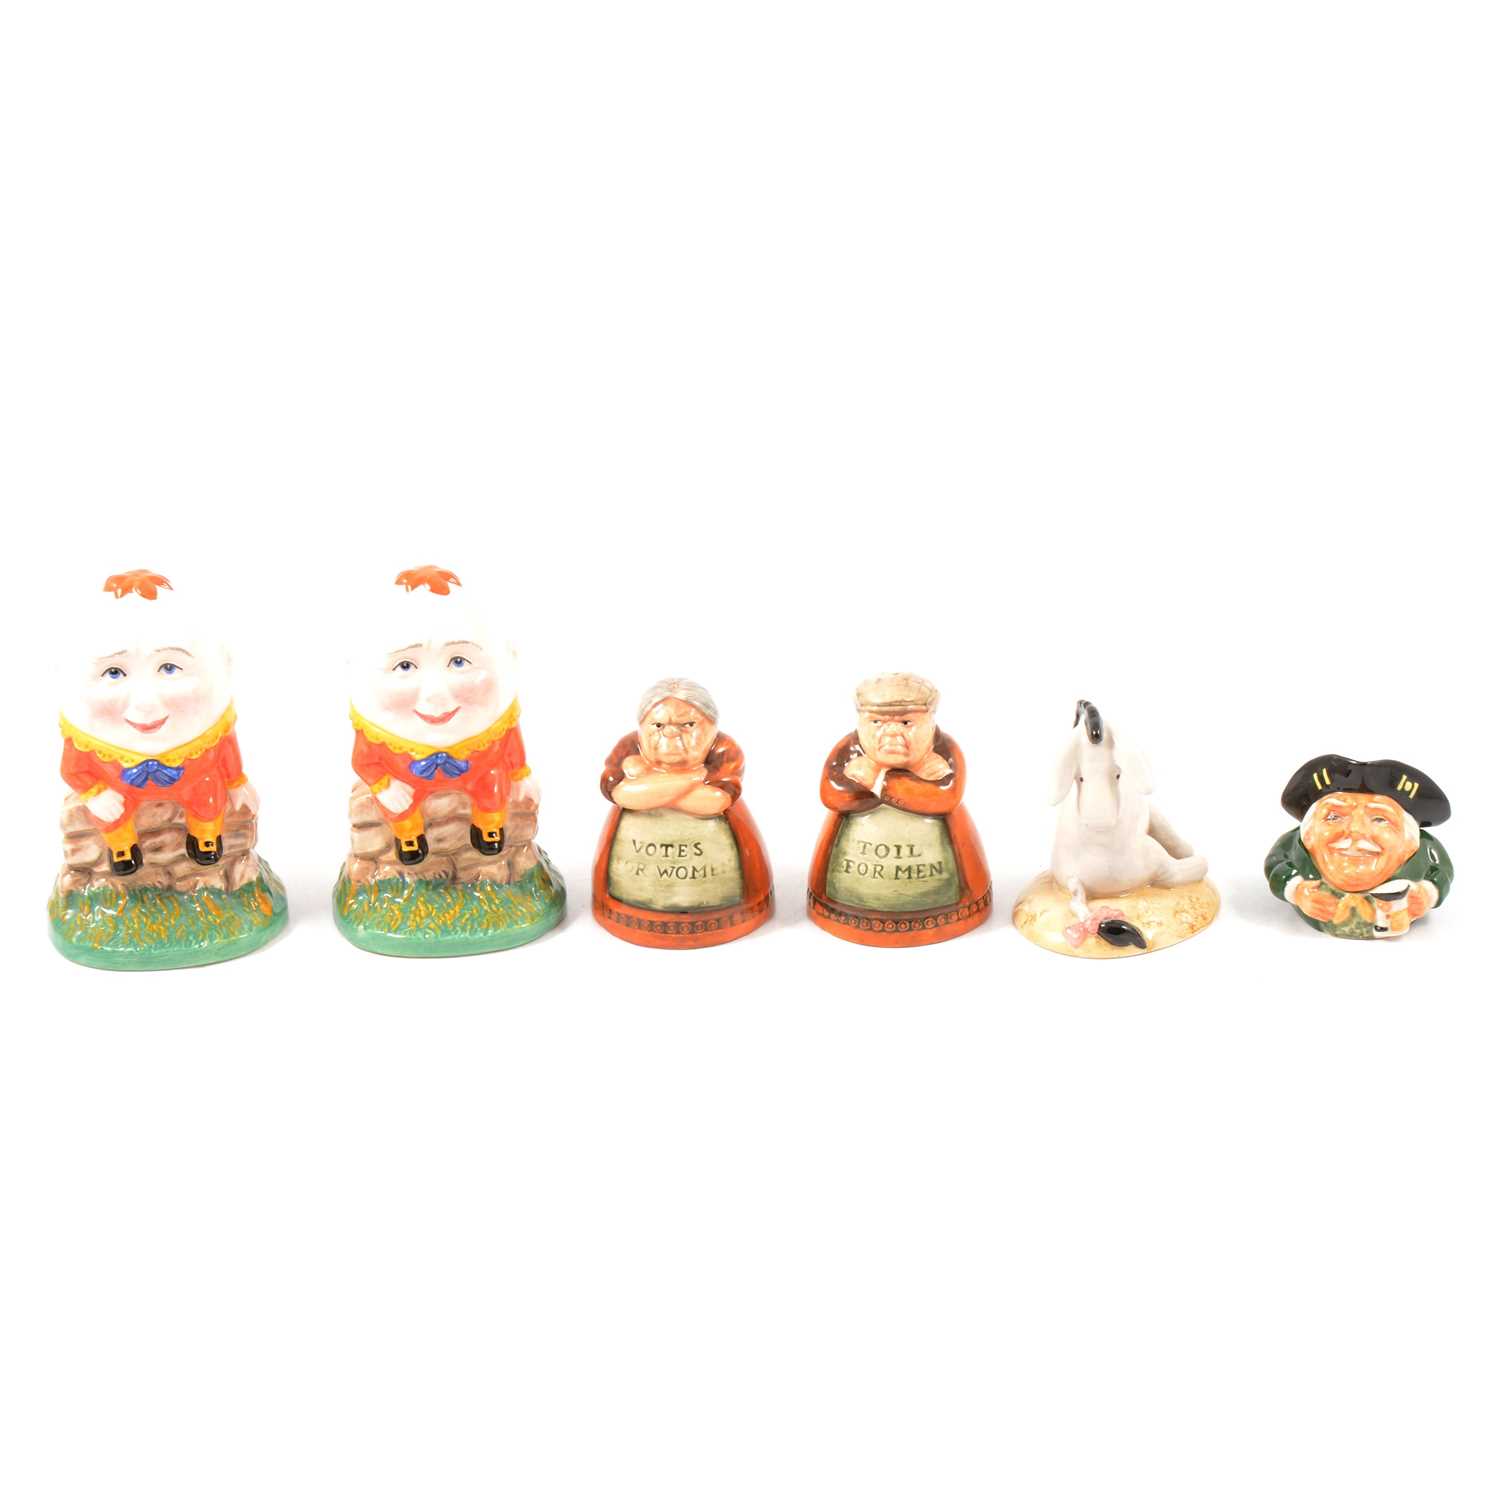 Lot 49 - Five Royal Doulton figurines and salt and pepper shakers, and a Kevin Francis face pot.